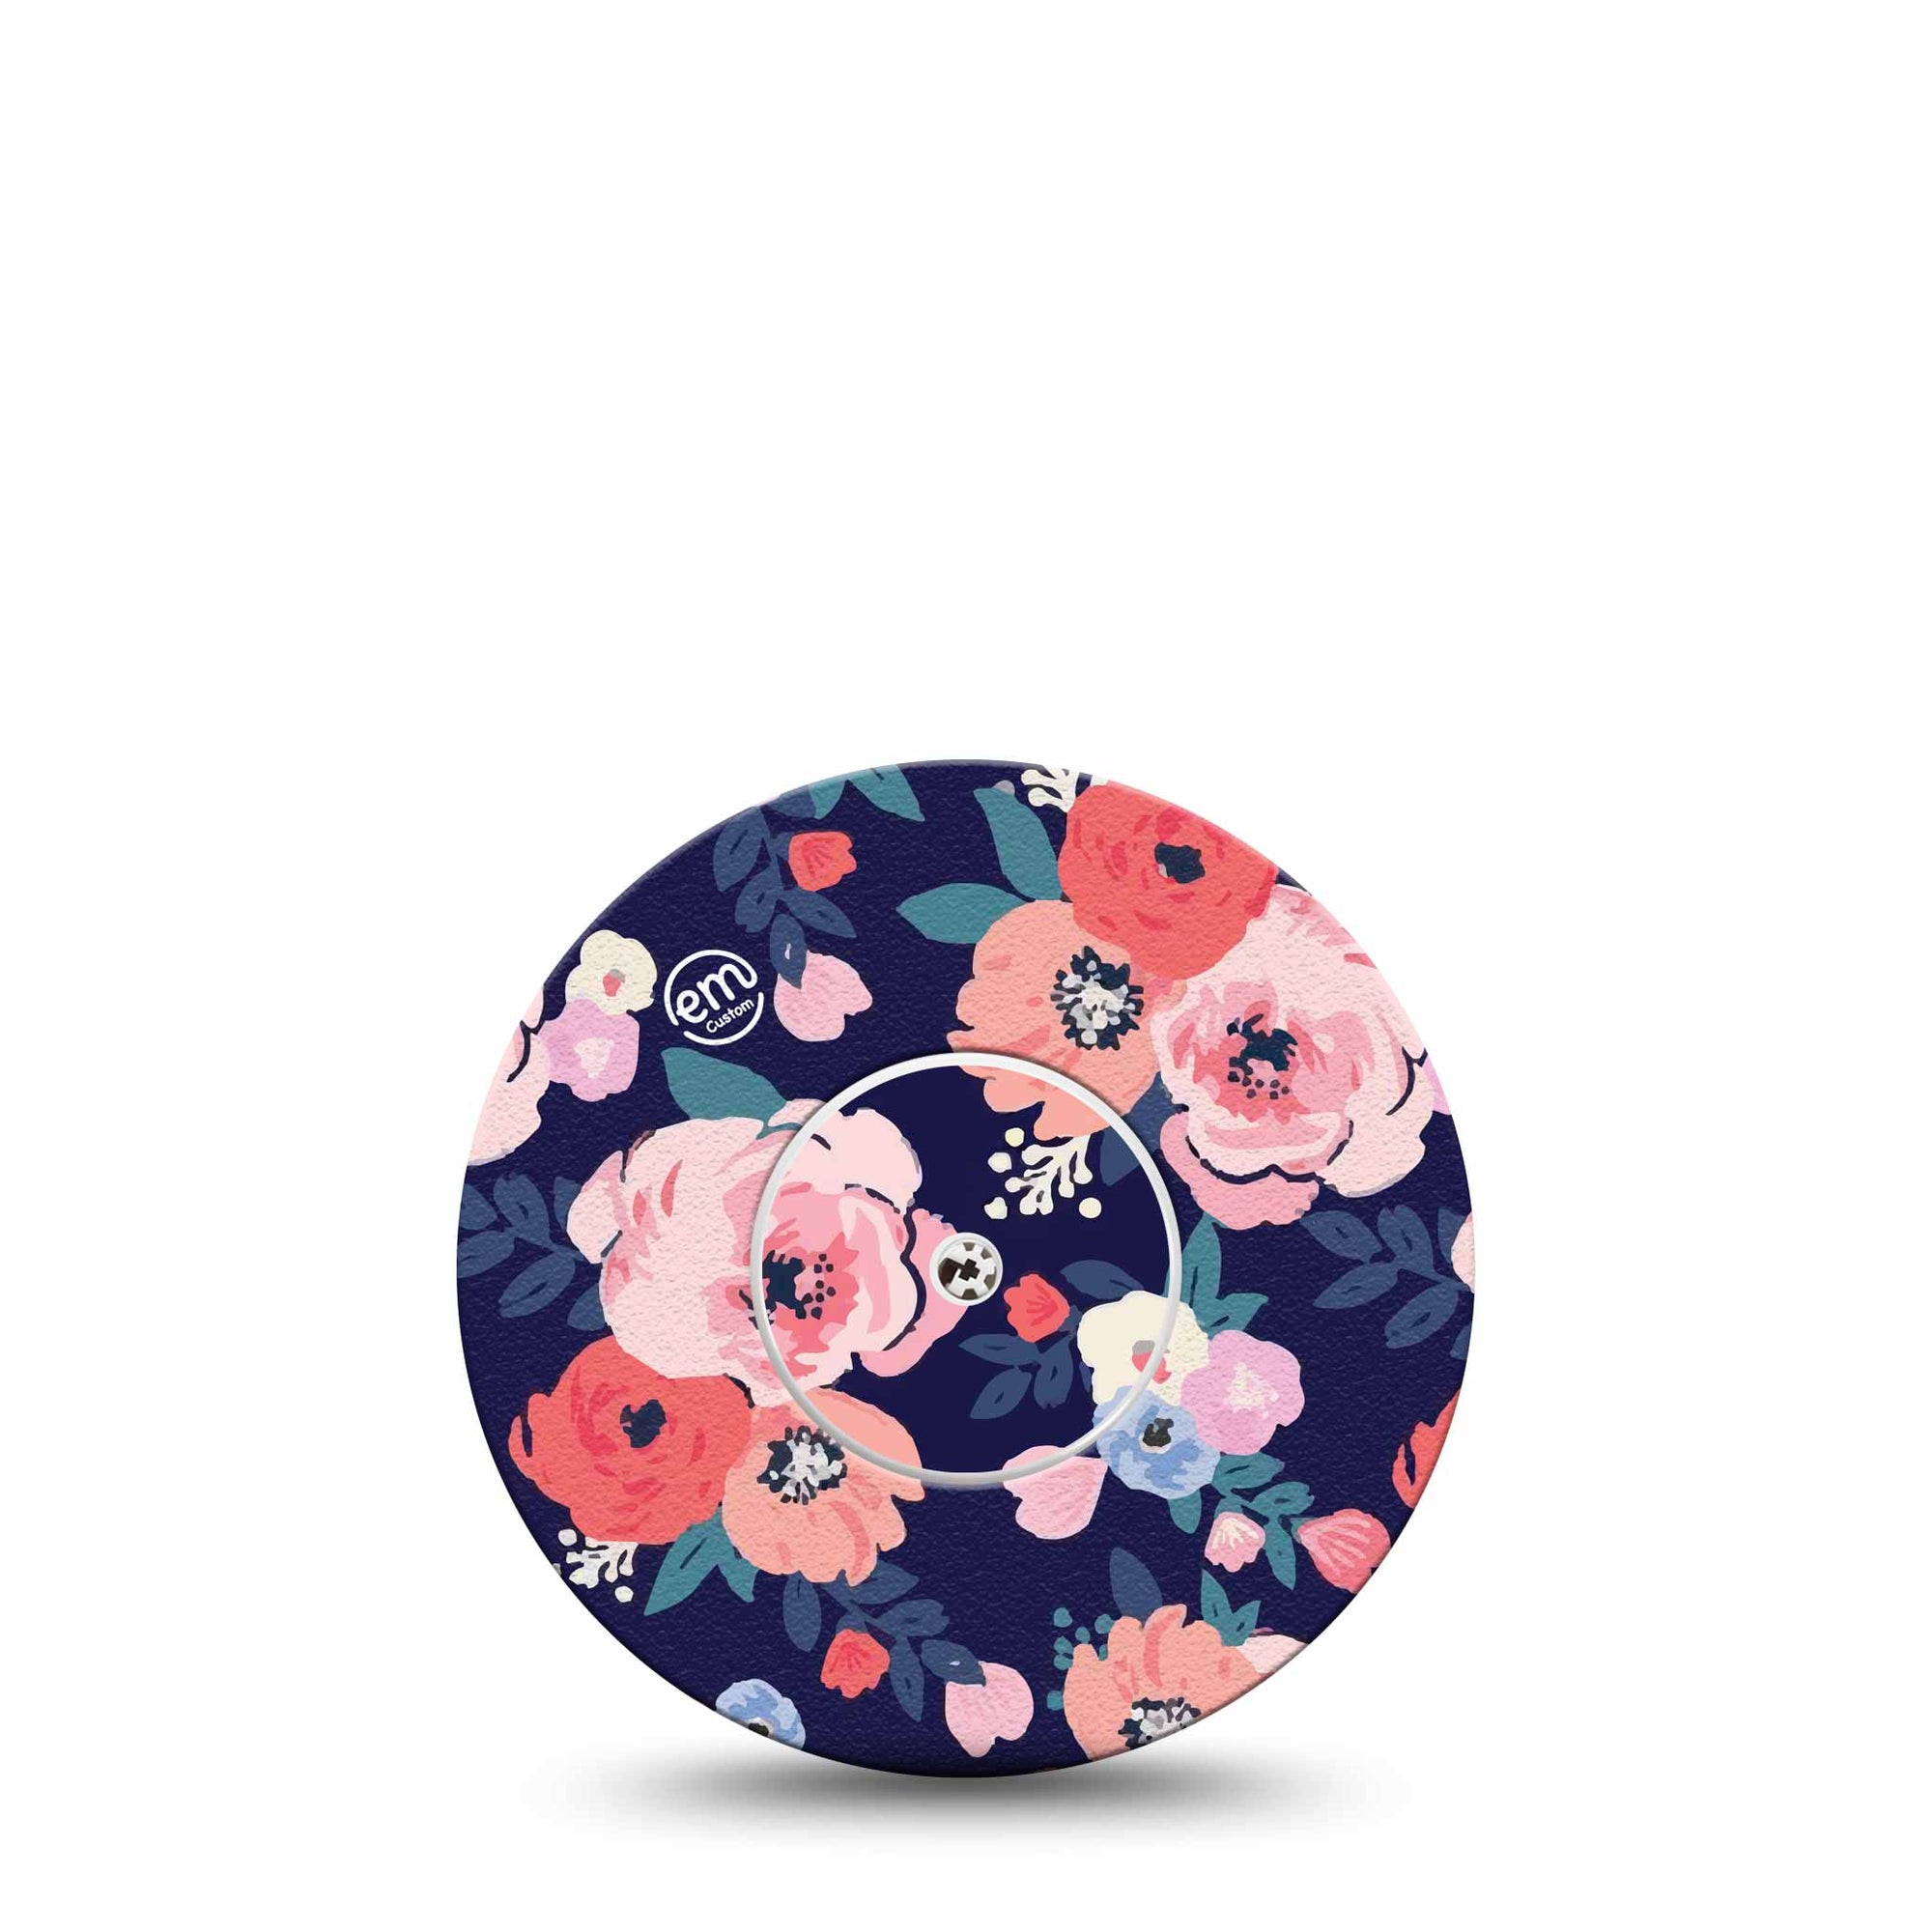 ExpressionMed Painted Flower Libre Transmitter Sticker with Tape